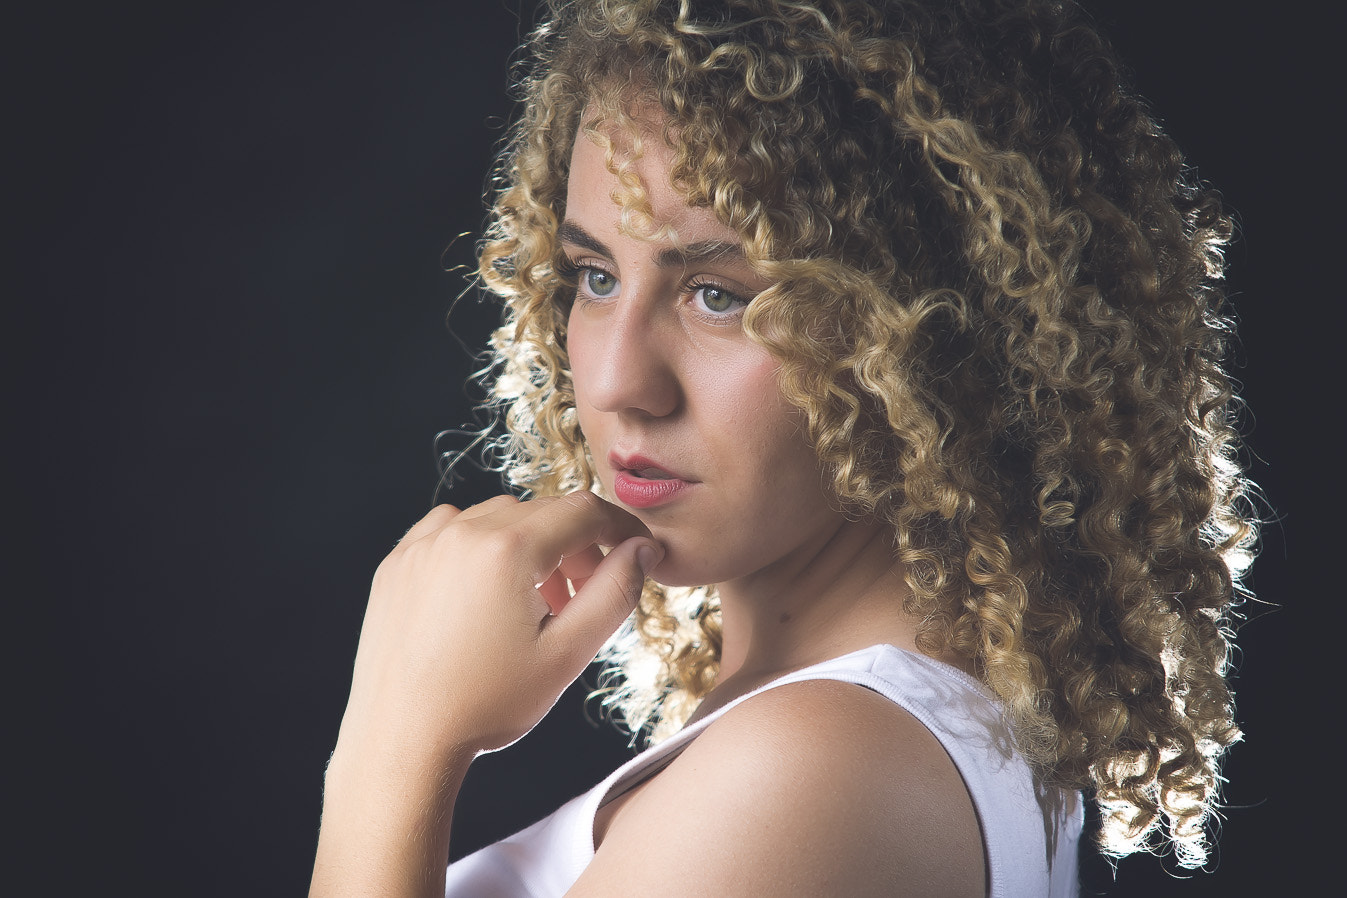 Nikon D7100 sample photo. Blonde girl with curly hair thinking photography